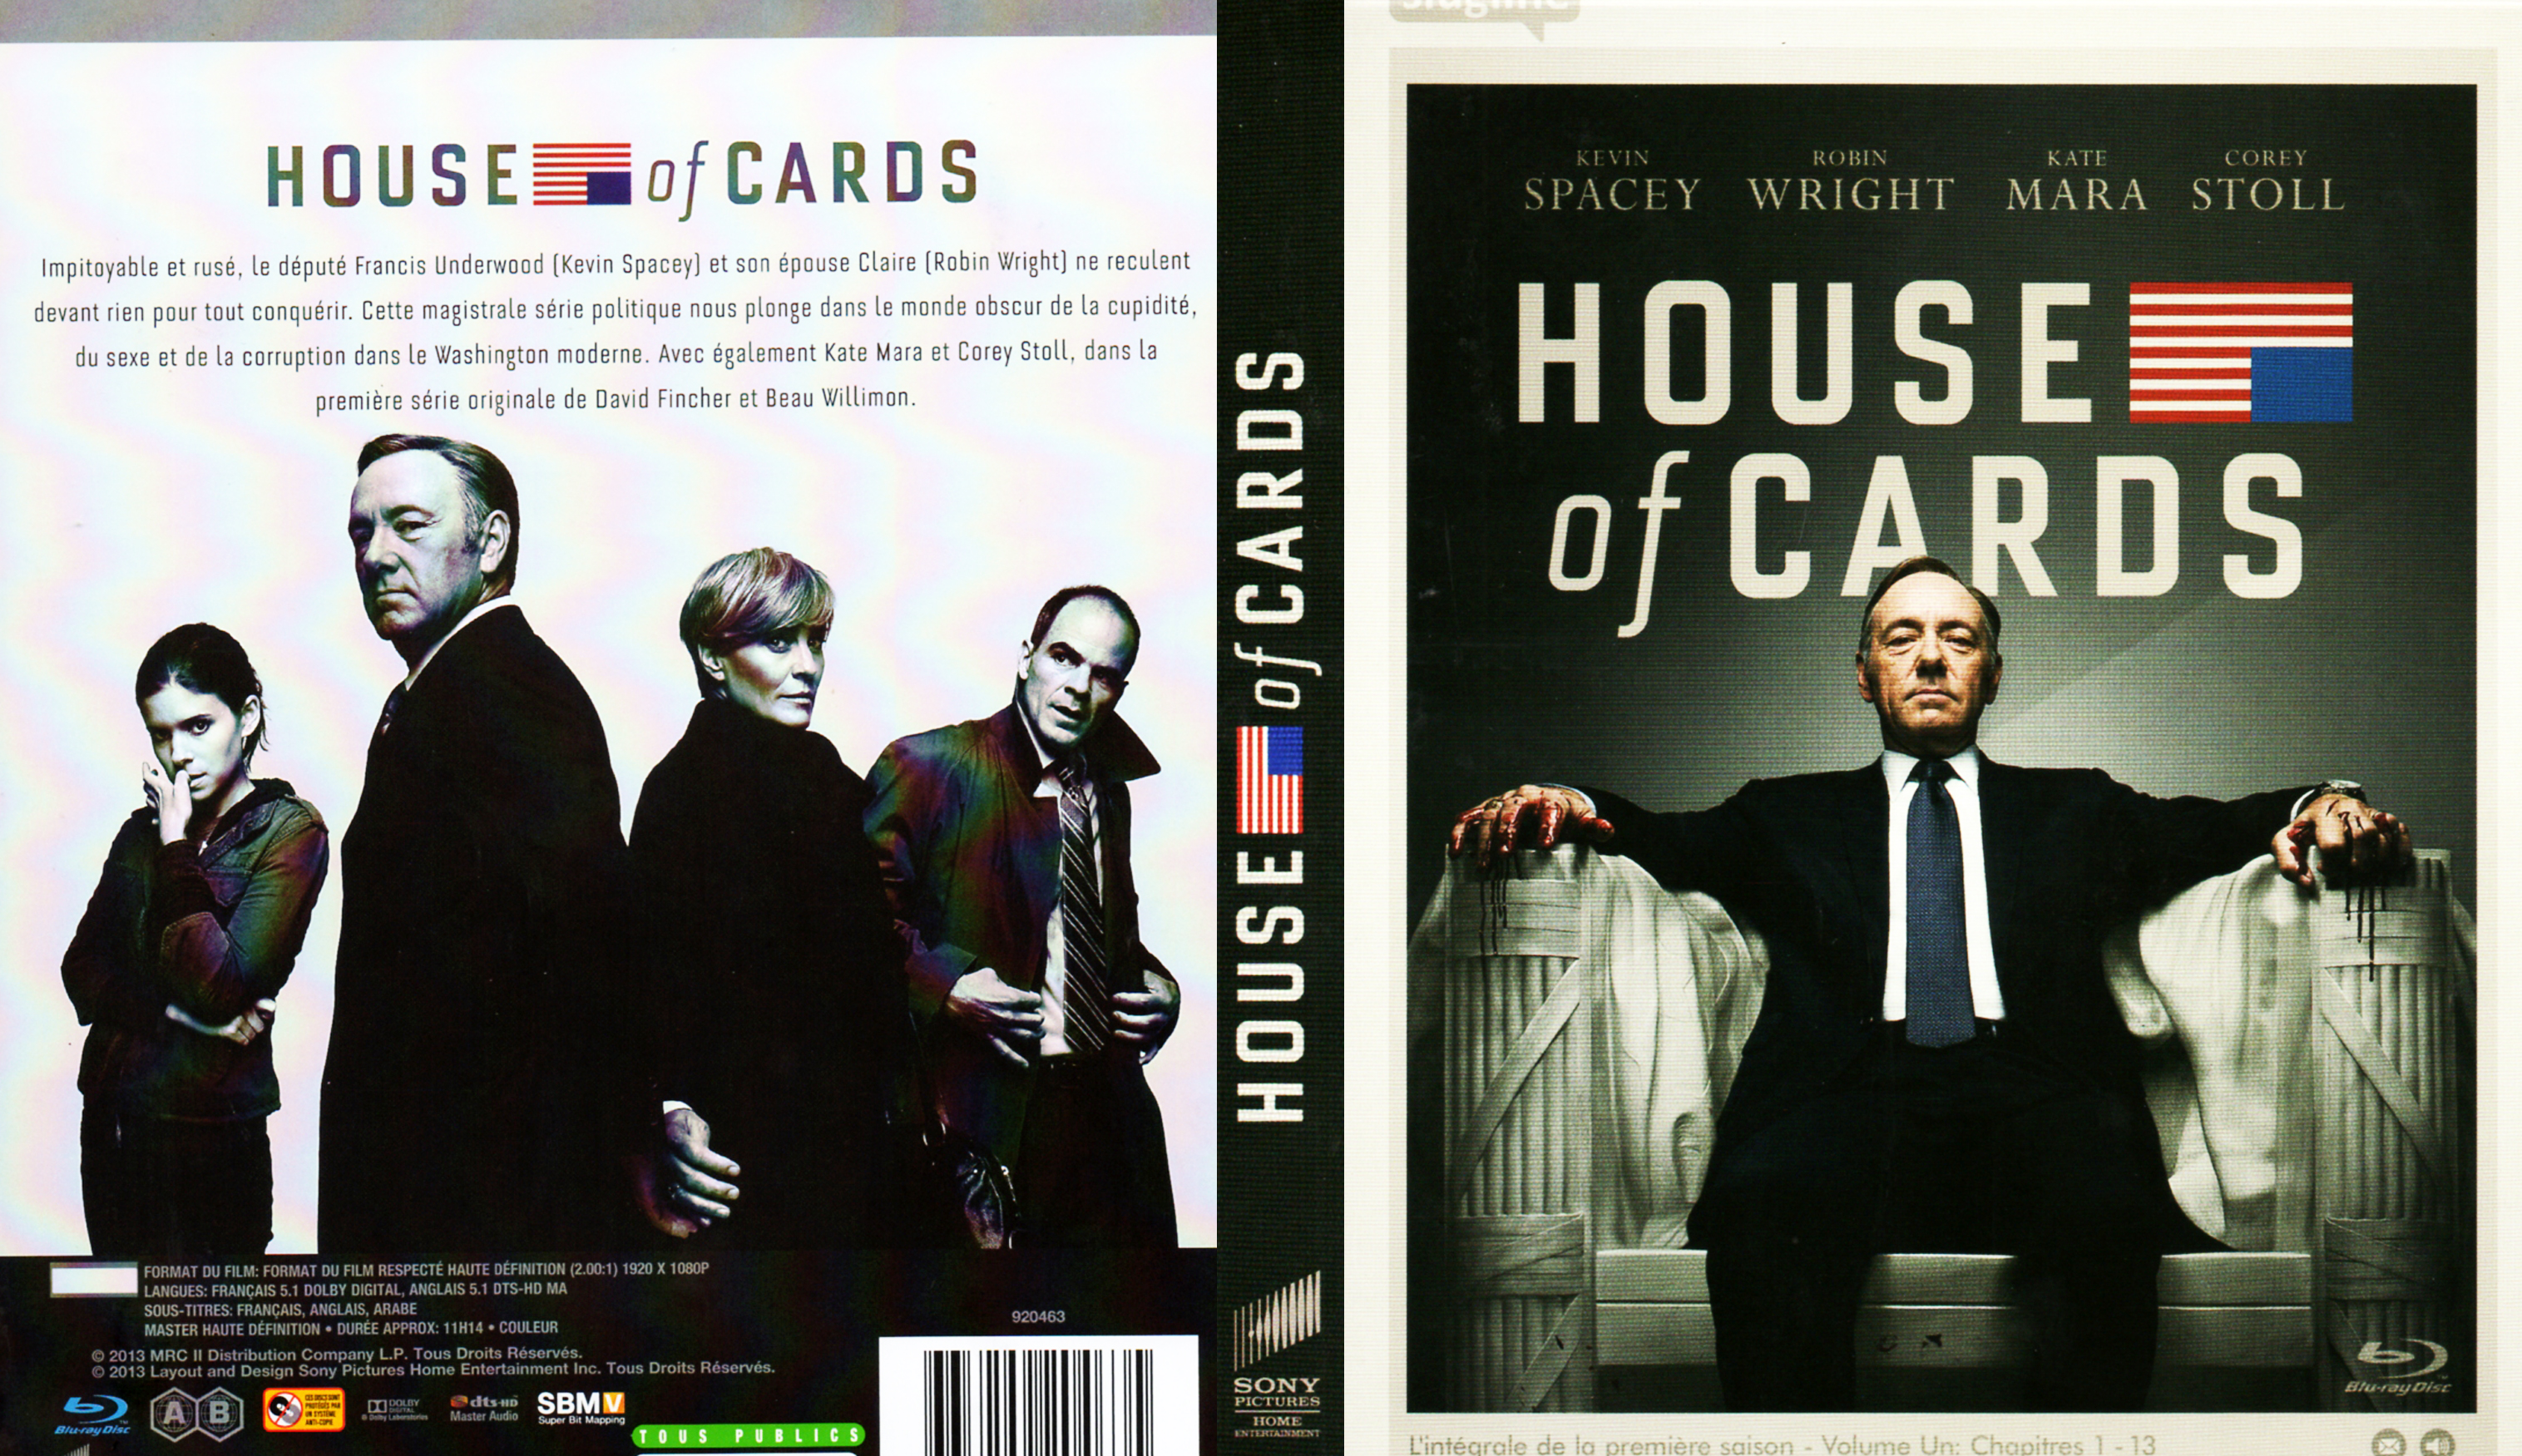 Jaquette DVD House Of Cards Saison 1 (BLU-RAY)